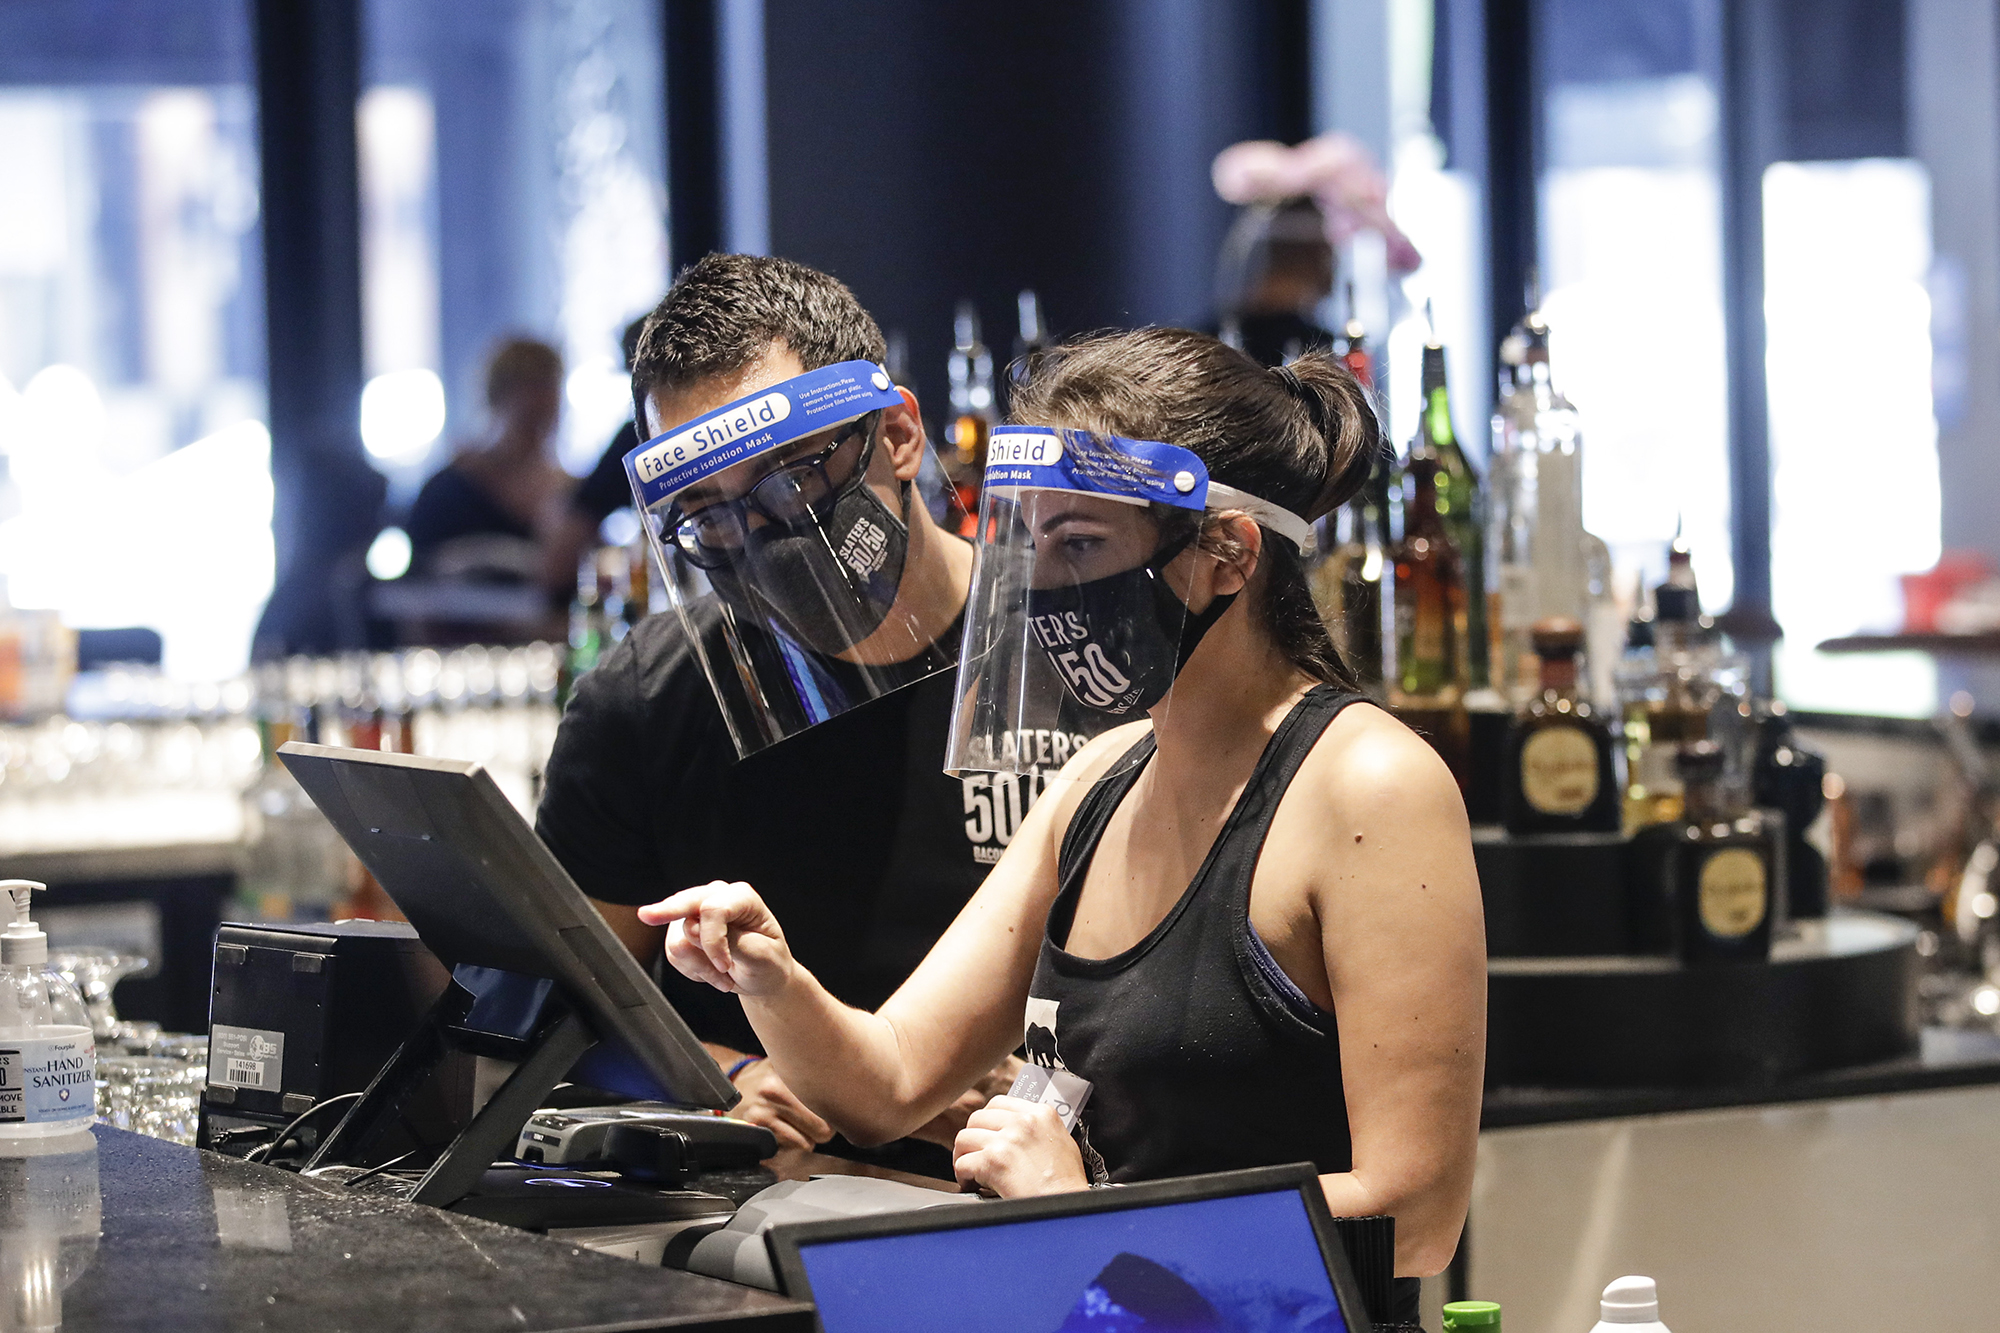 Bartenders were masks and face shields as they work at Slater's 50|50 on July 1, 2020, in Santa Clarita. Photo by /Marcio Jose Sanchez, AP Photo